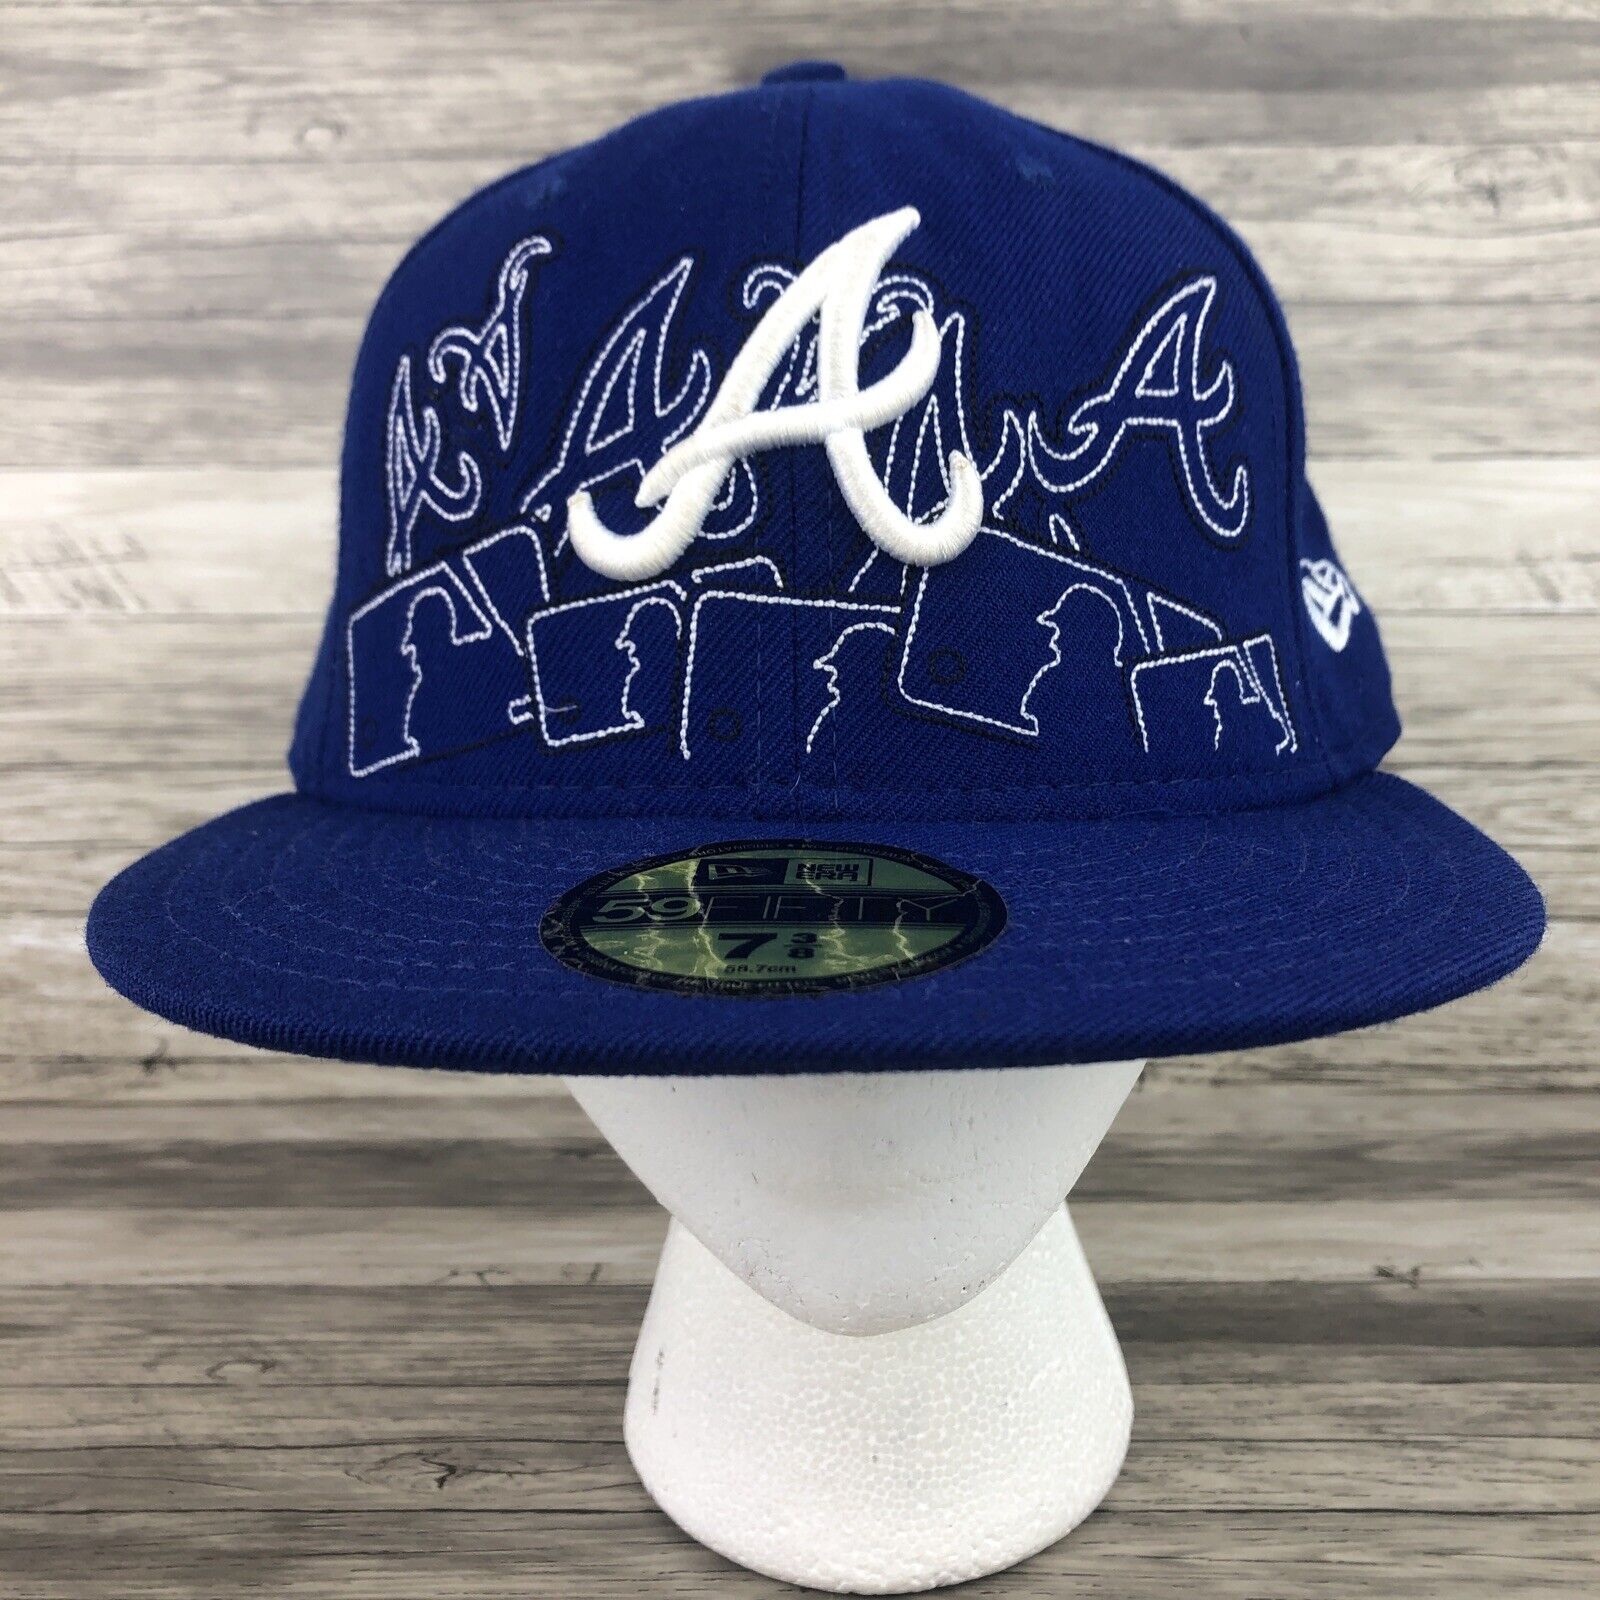 New Era 59Fifty MLB Atlanta Braves Blue Embroidered Fitted Cap Hat